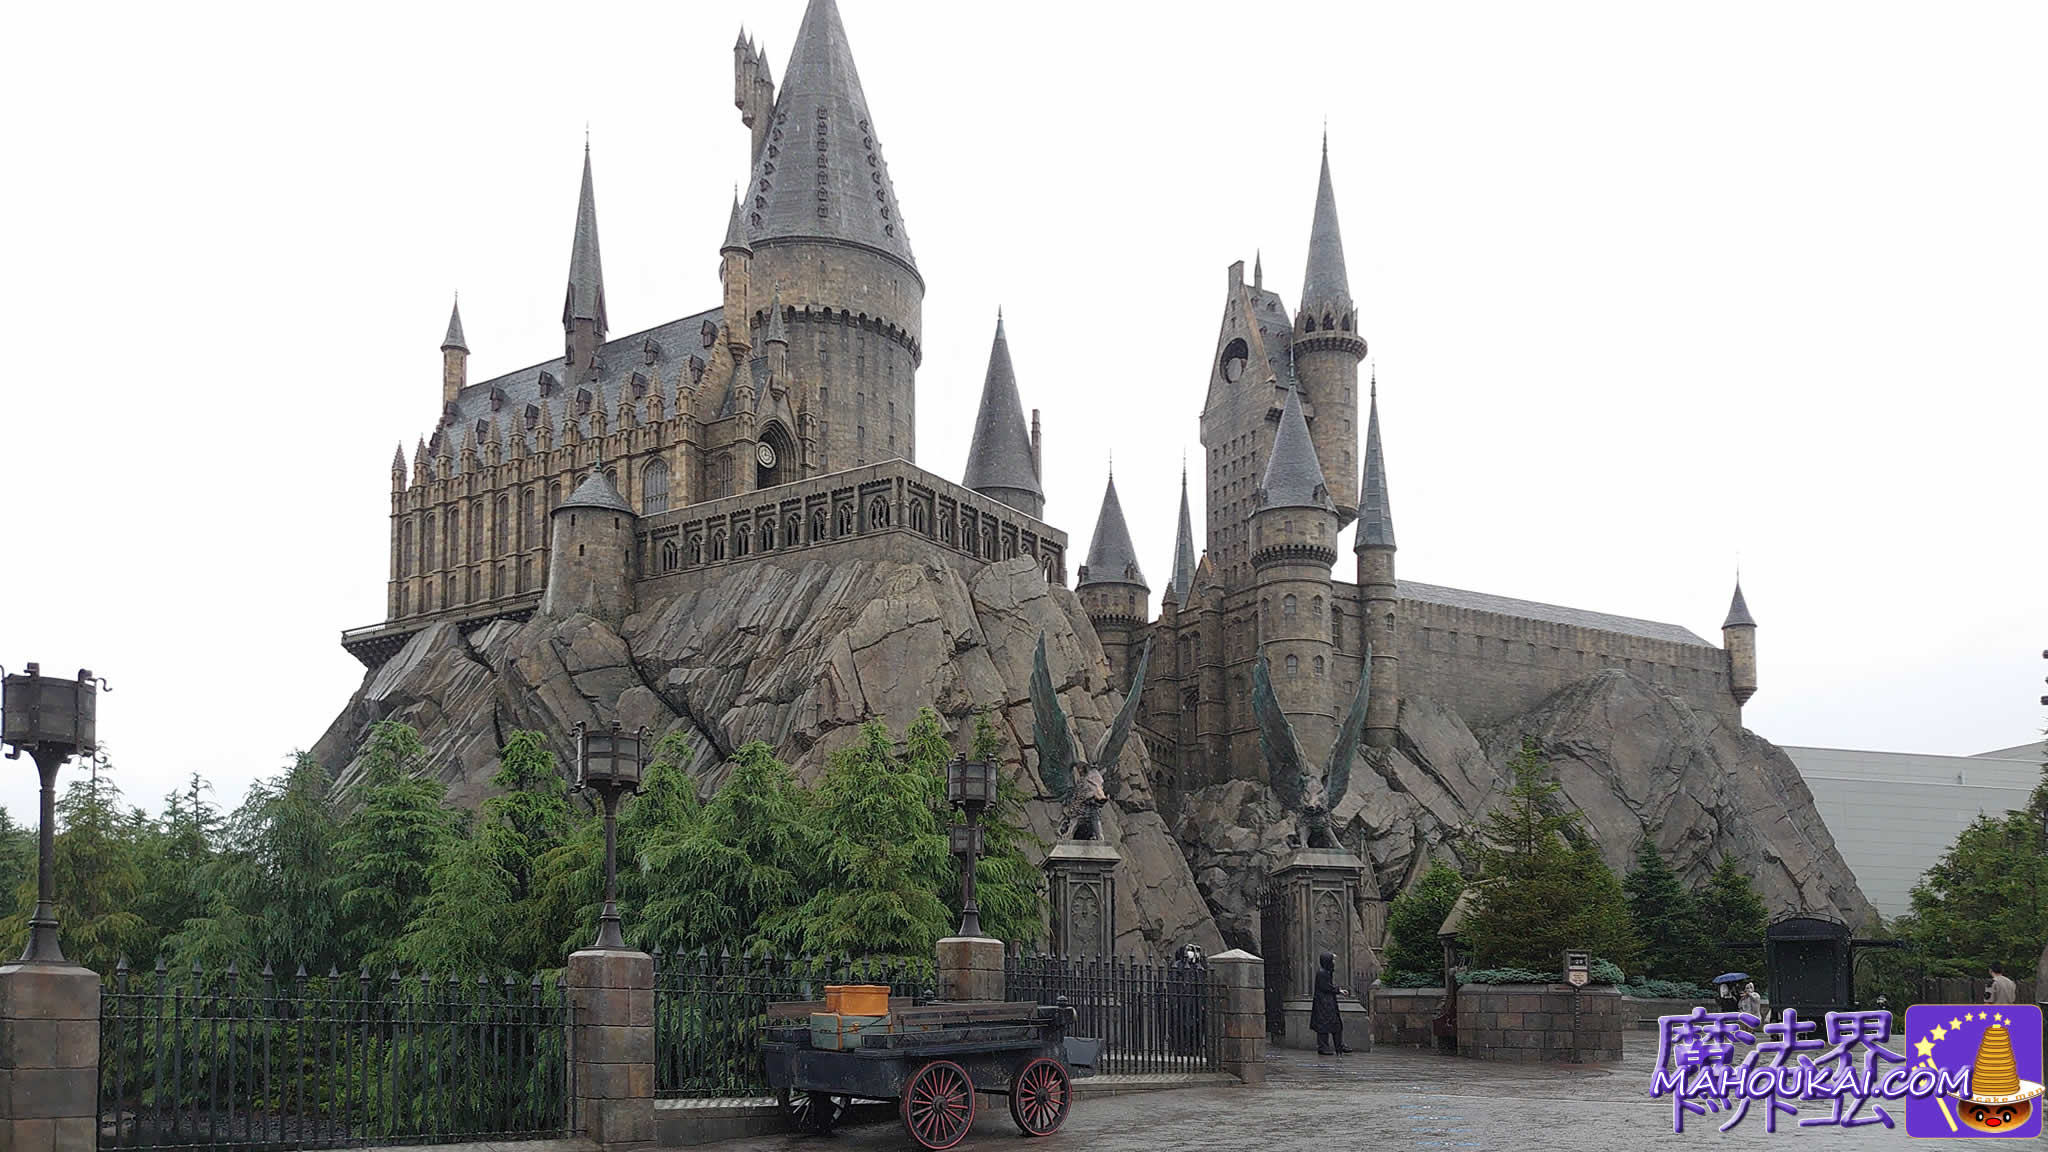 Harry Potter and the Forbidden Journey (Harry Potter and the Forbidden Journey) Hogwarts Castle attraction.